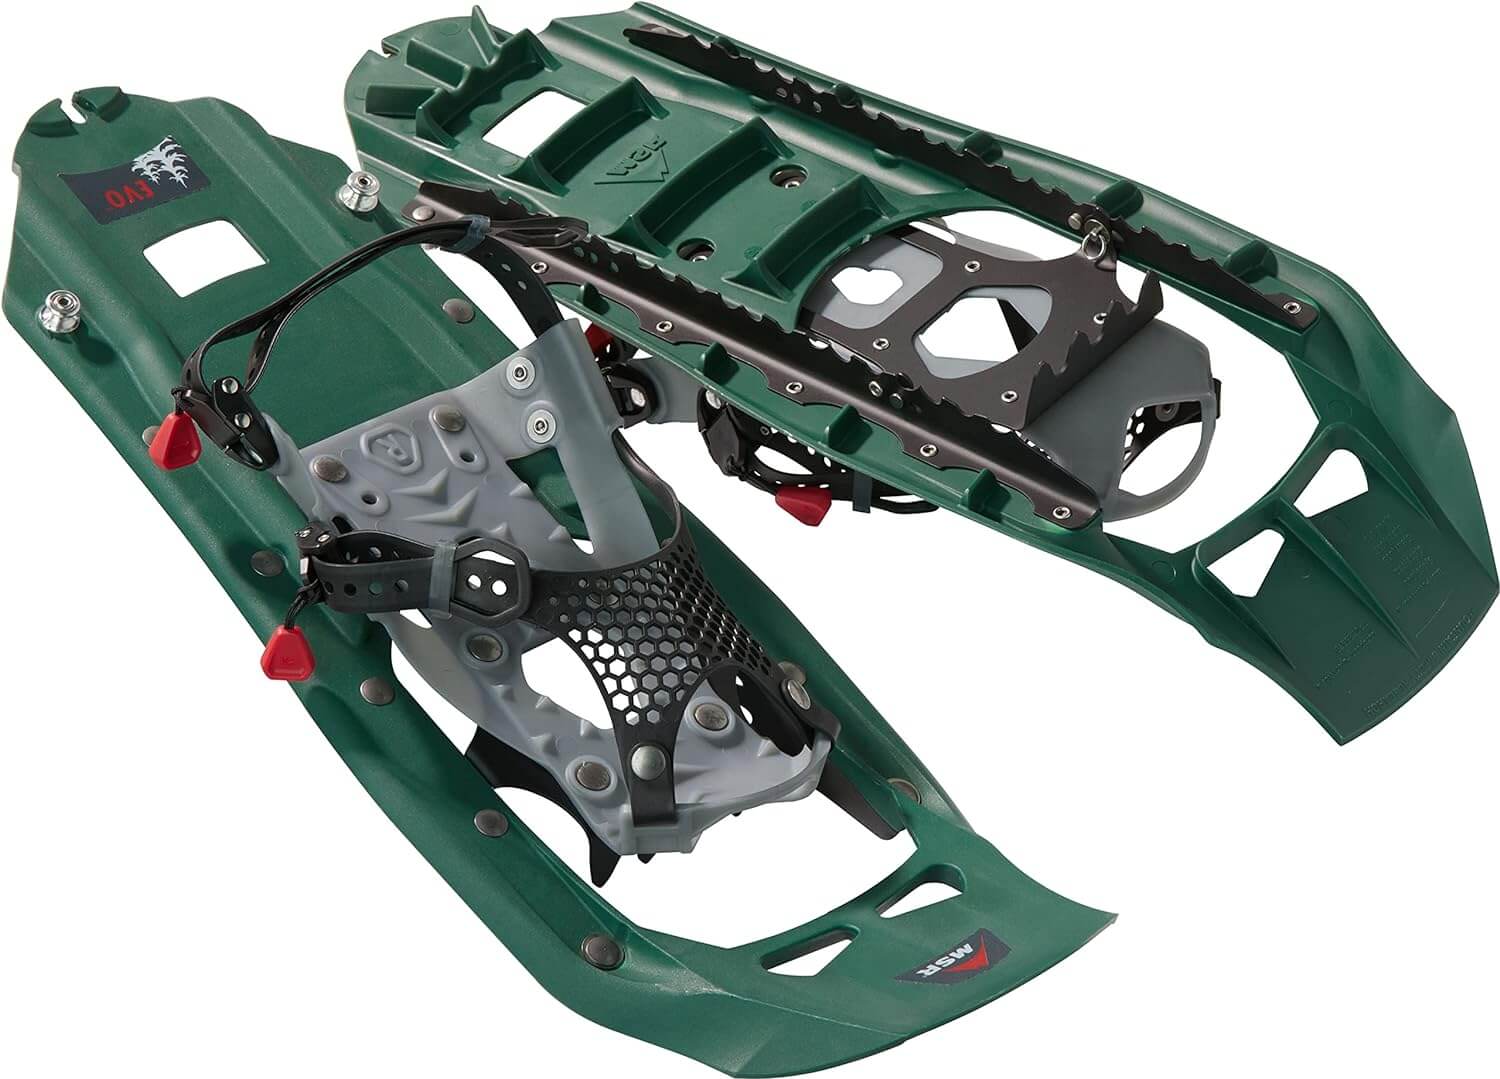 Shop The Latest >MSR Evo Trail Snowshoes - Made in the USA > *Only $197.32*> From The Top Brand > *MSRl* > Shop Now and Get Free Shipping On Orders Over $45.00 >*Shop Earth Foot*